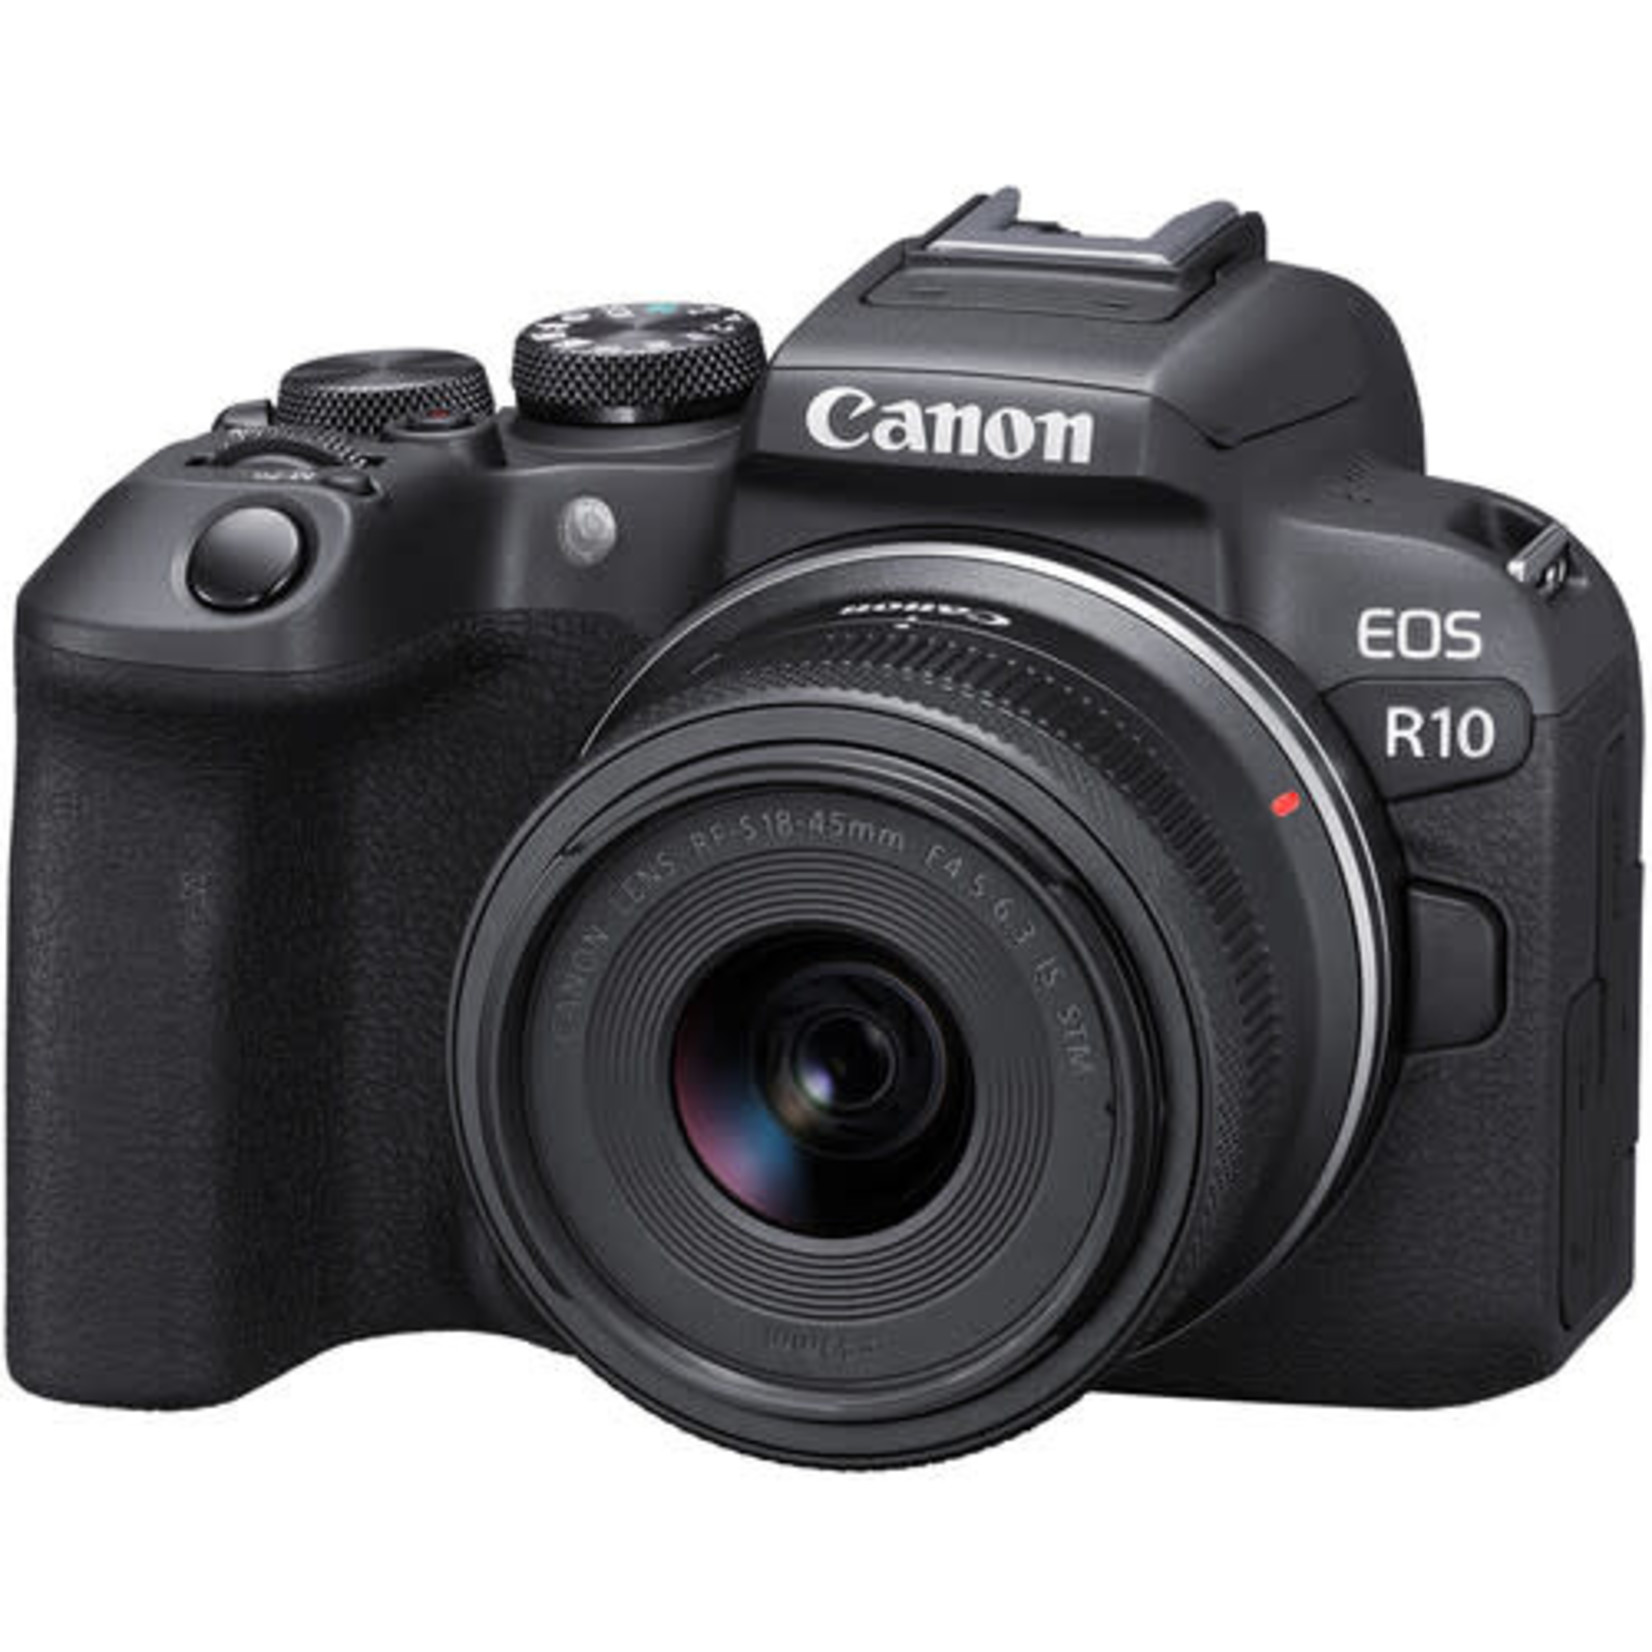 Canon Canon EOS R10 Mirrorless Camera with 18-45mm Lens